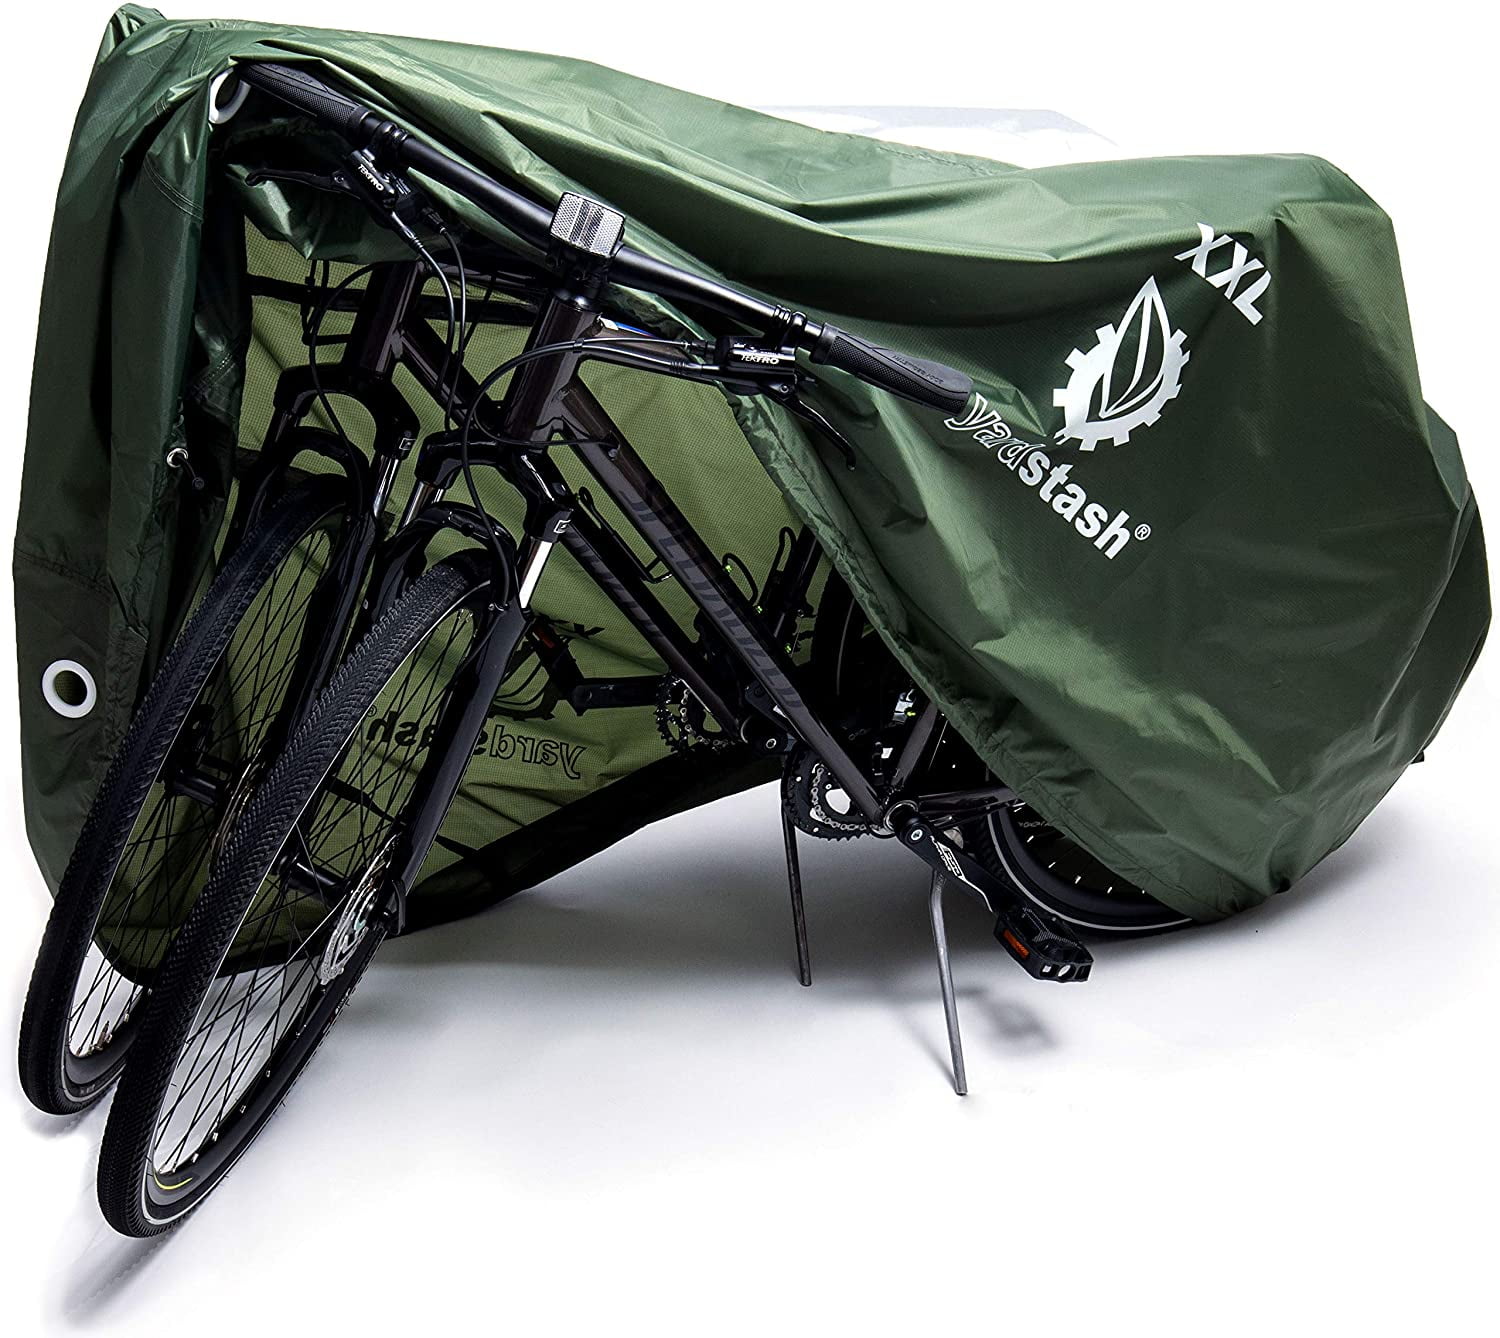 MarLine Bike Cover Outdoor Waterproof Bicycle Cover Dust Snow Proof with Lock Hole and Reflective Straps